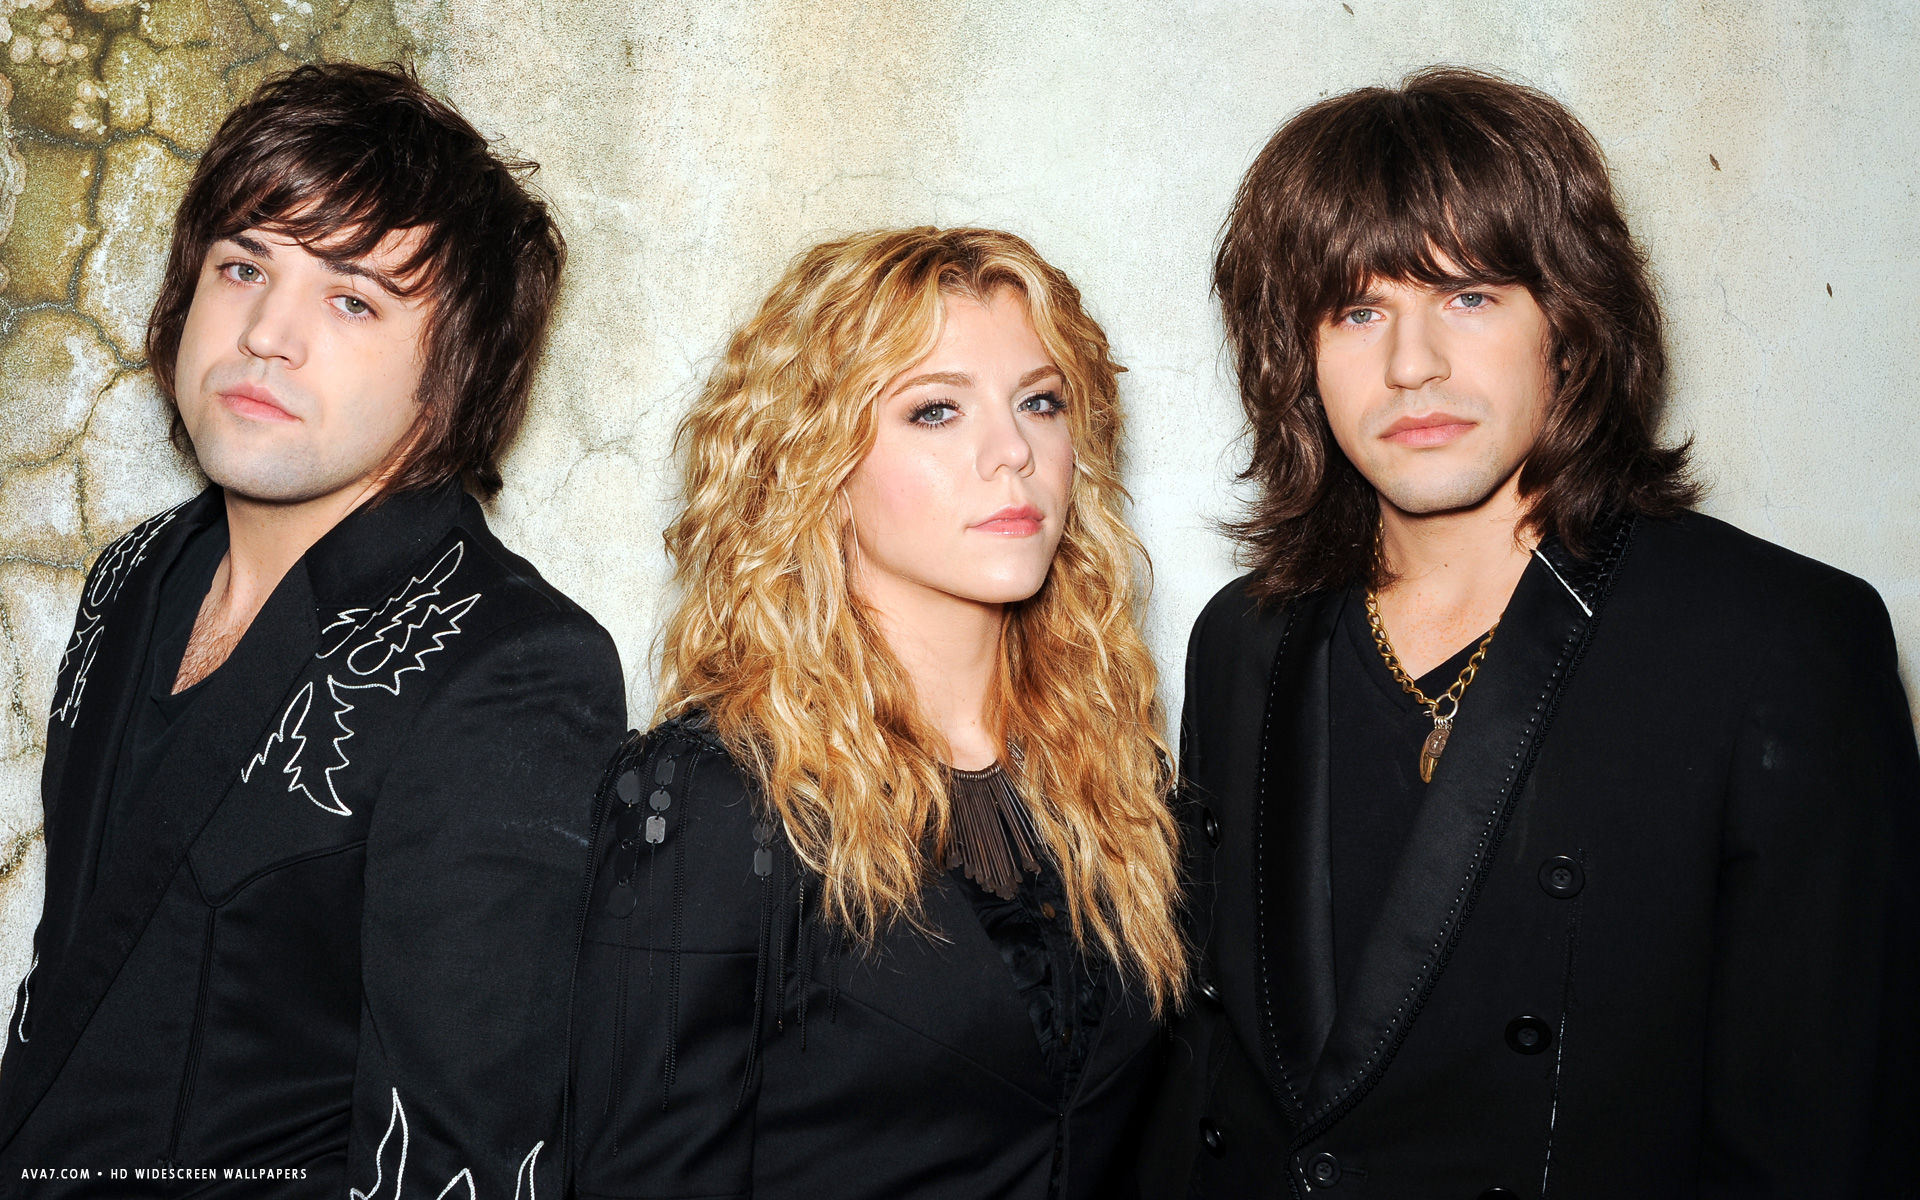 band perry music band group hd widescreen wallpaper